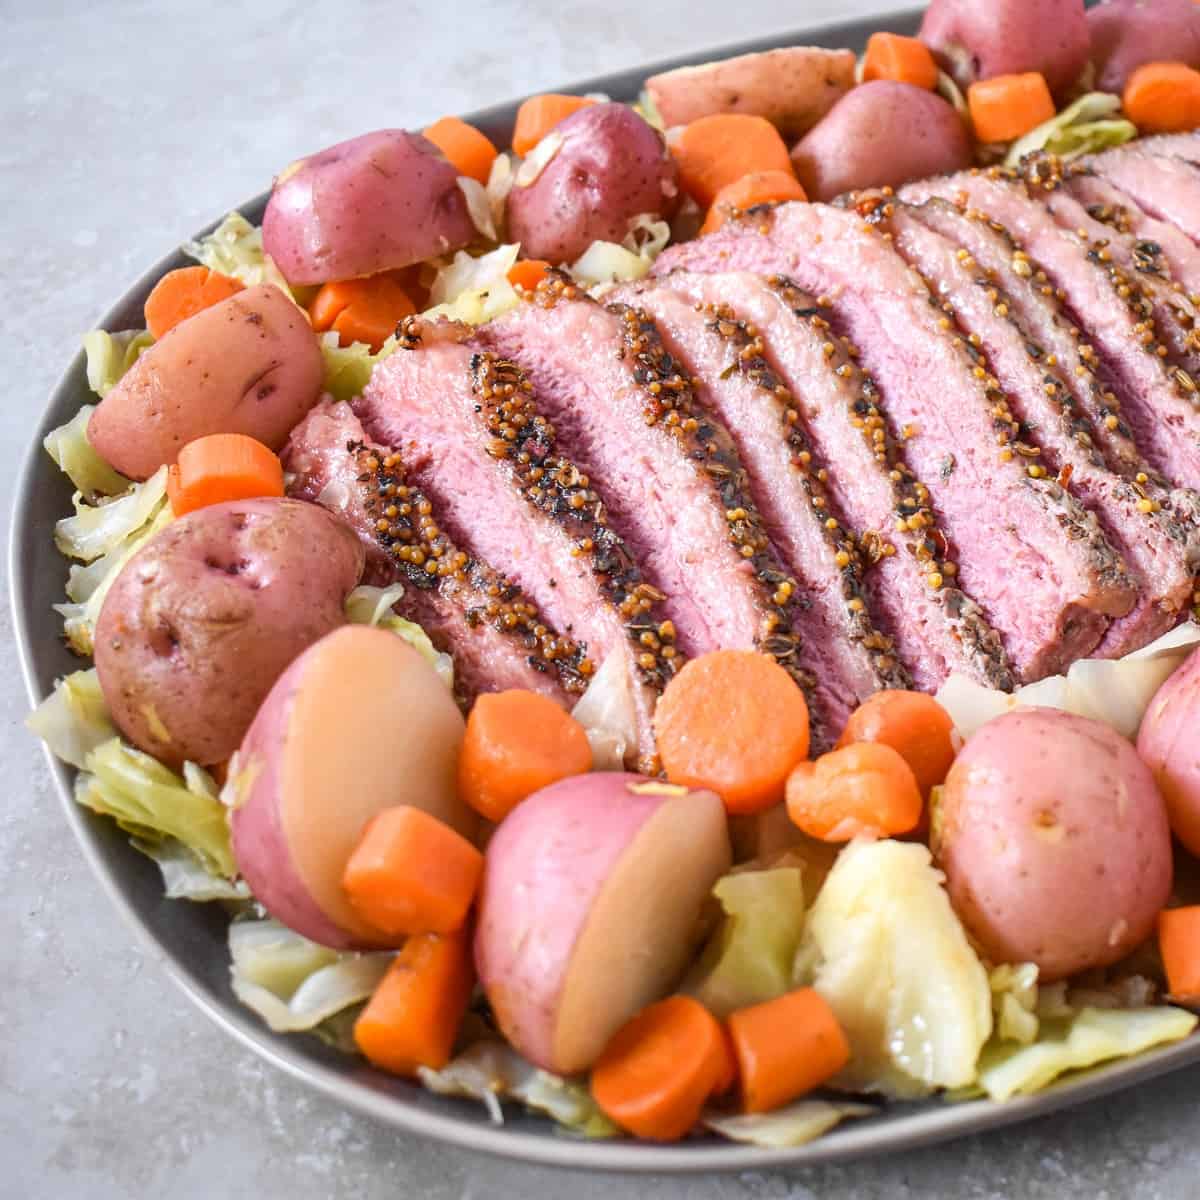 A close-up image of sliced corned beef, cabbage, potatoes, and carrots arranged on a large platter.